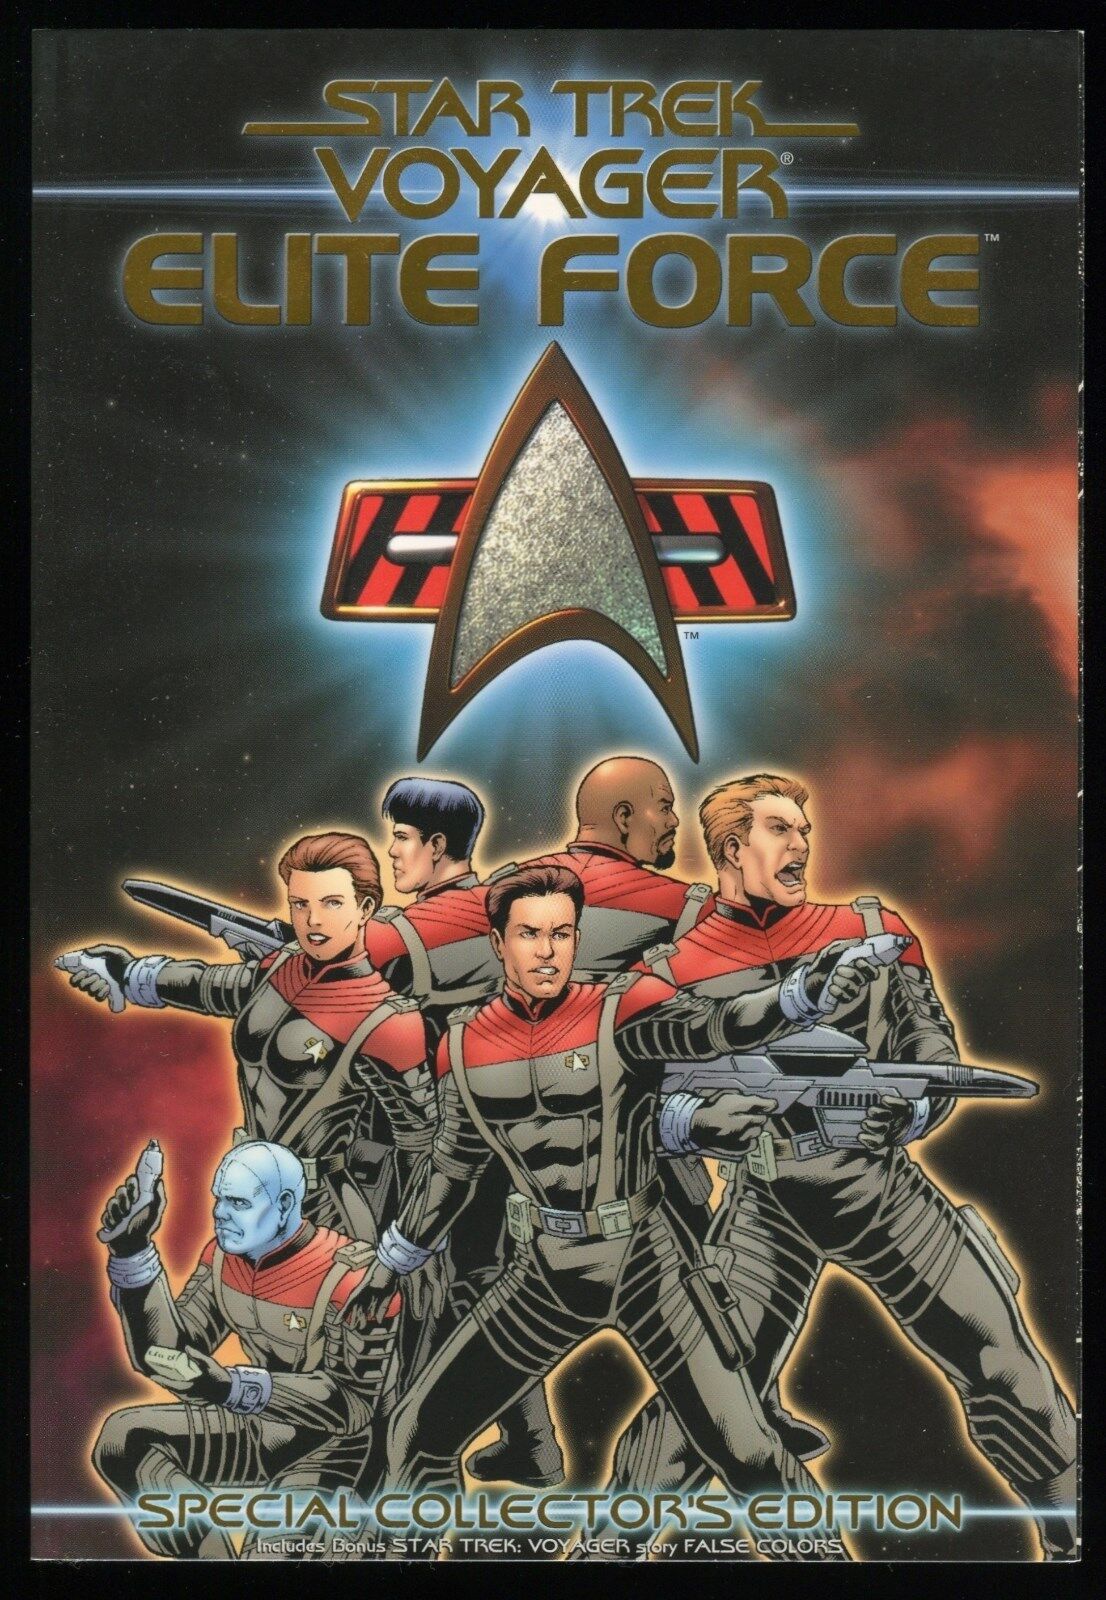 Star Trek Voyager Elite Force Special Collectors Edition Trade Paperback TPB New